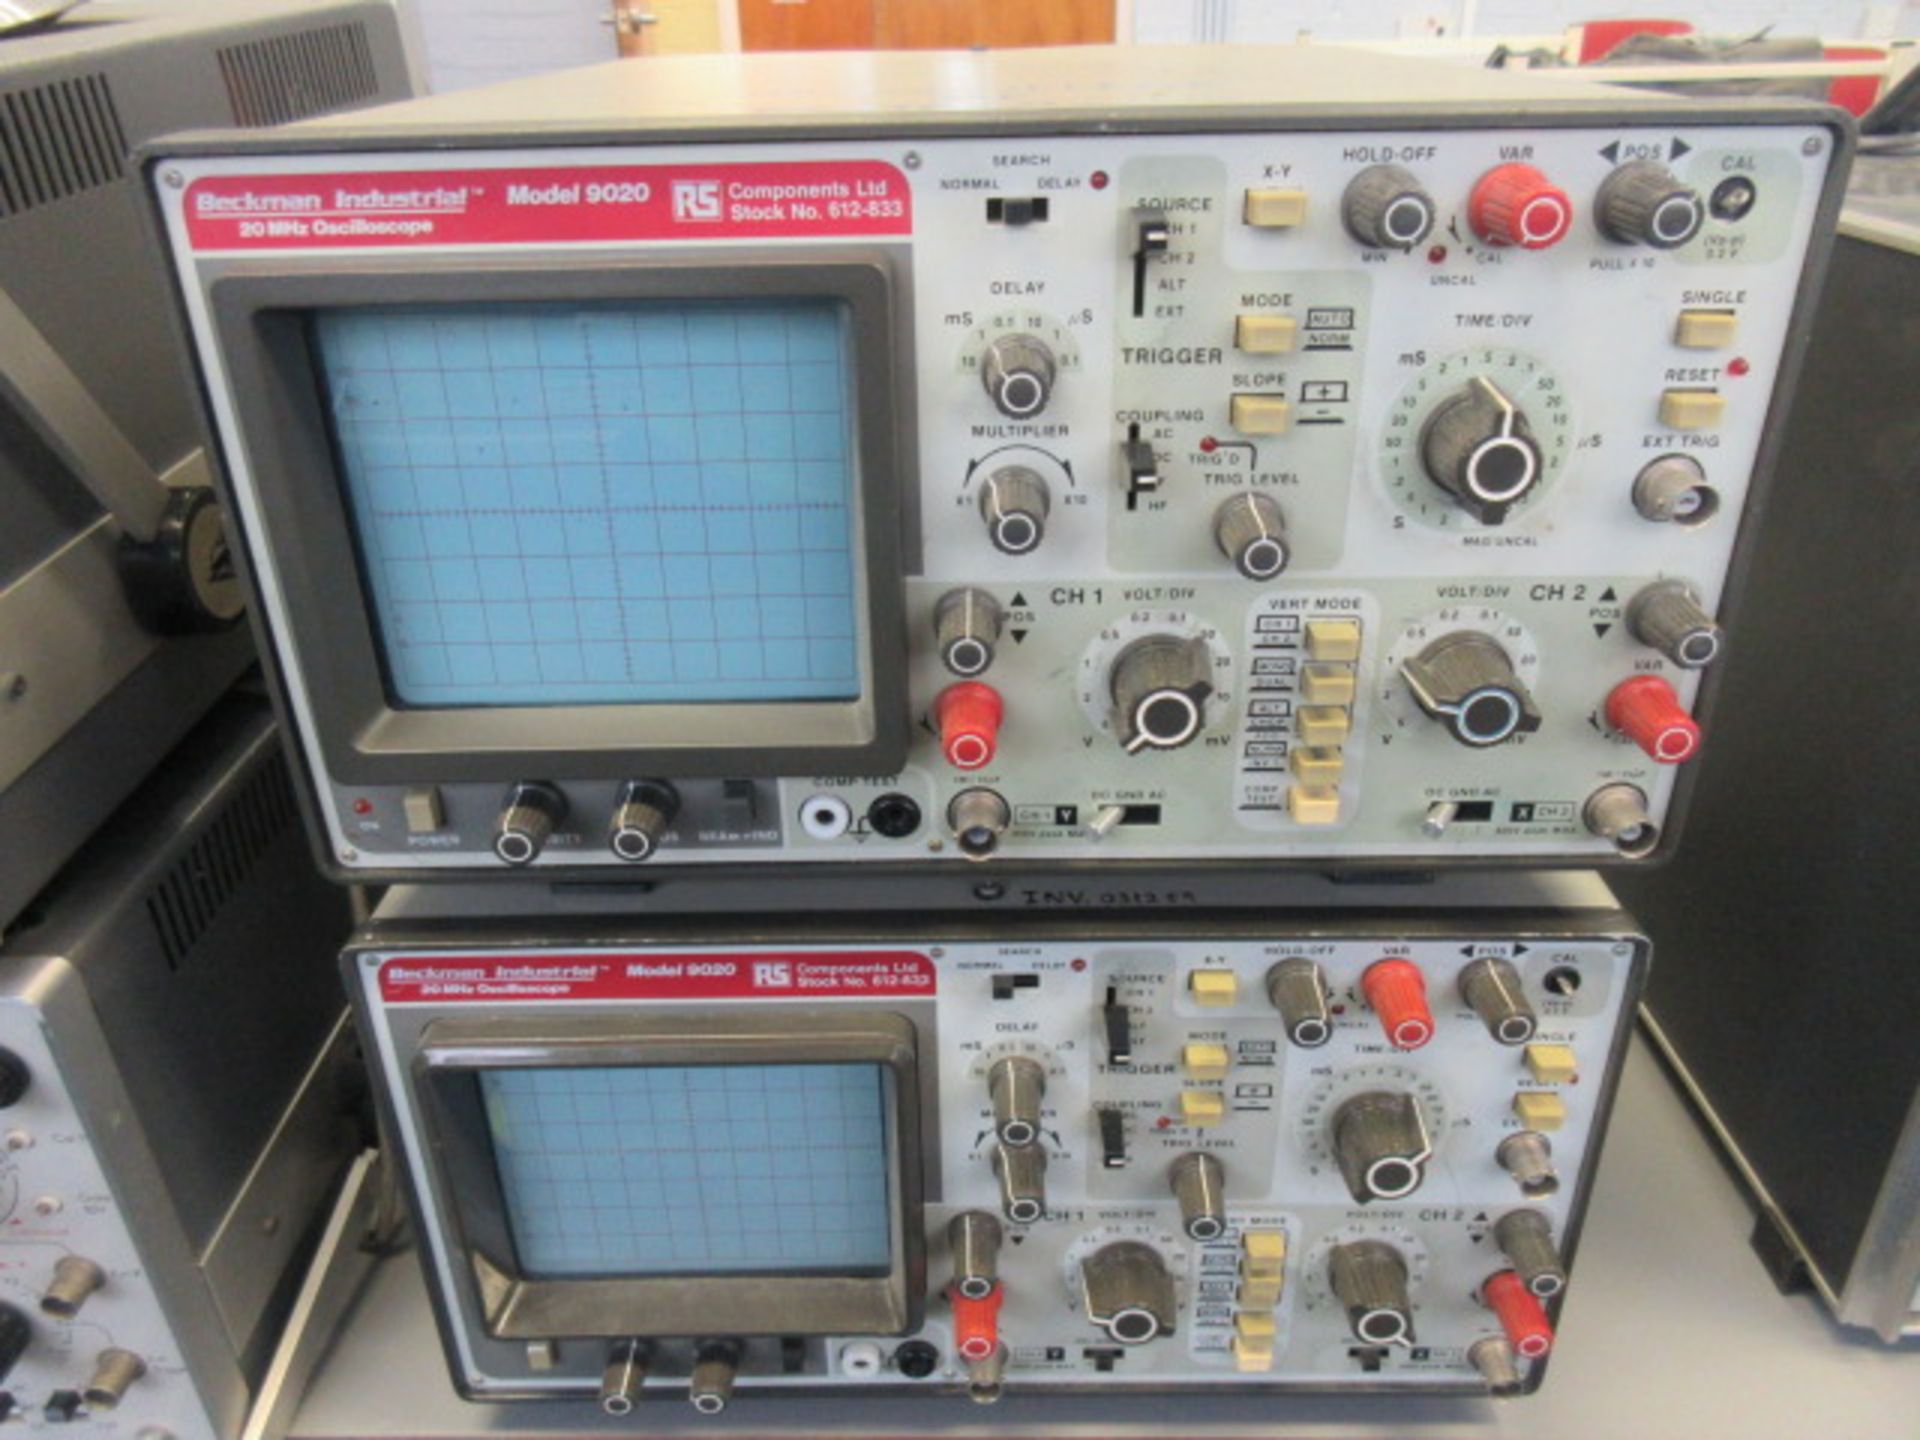 TWO BECKMAN INDUSTRIAL 20 MHz 9020 OSCILLOSCOPES